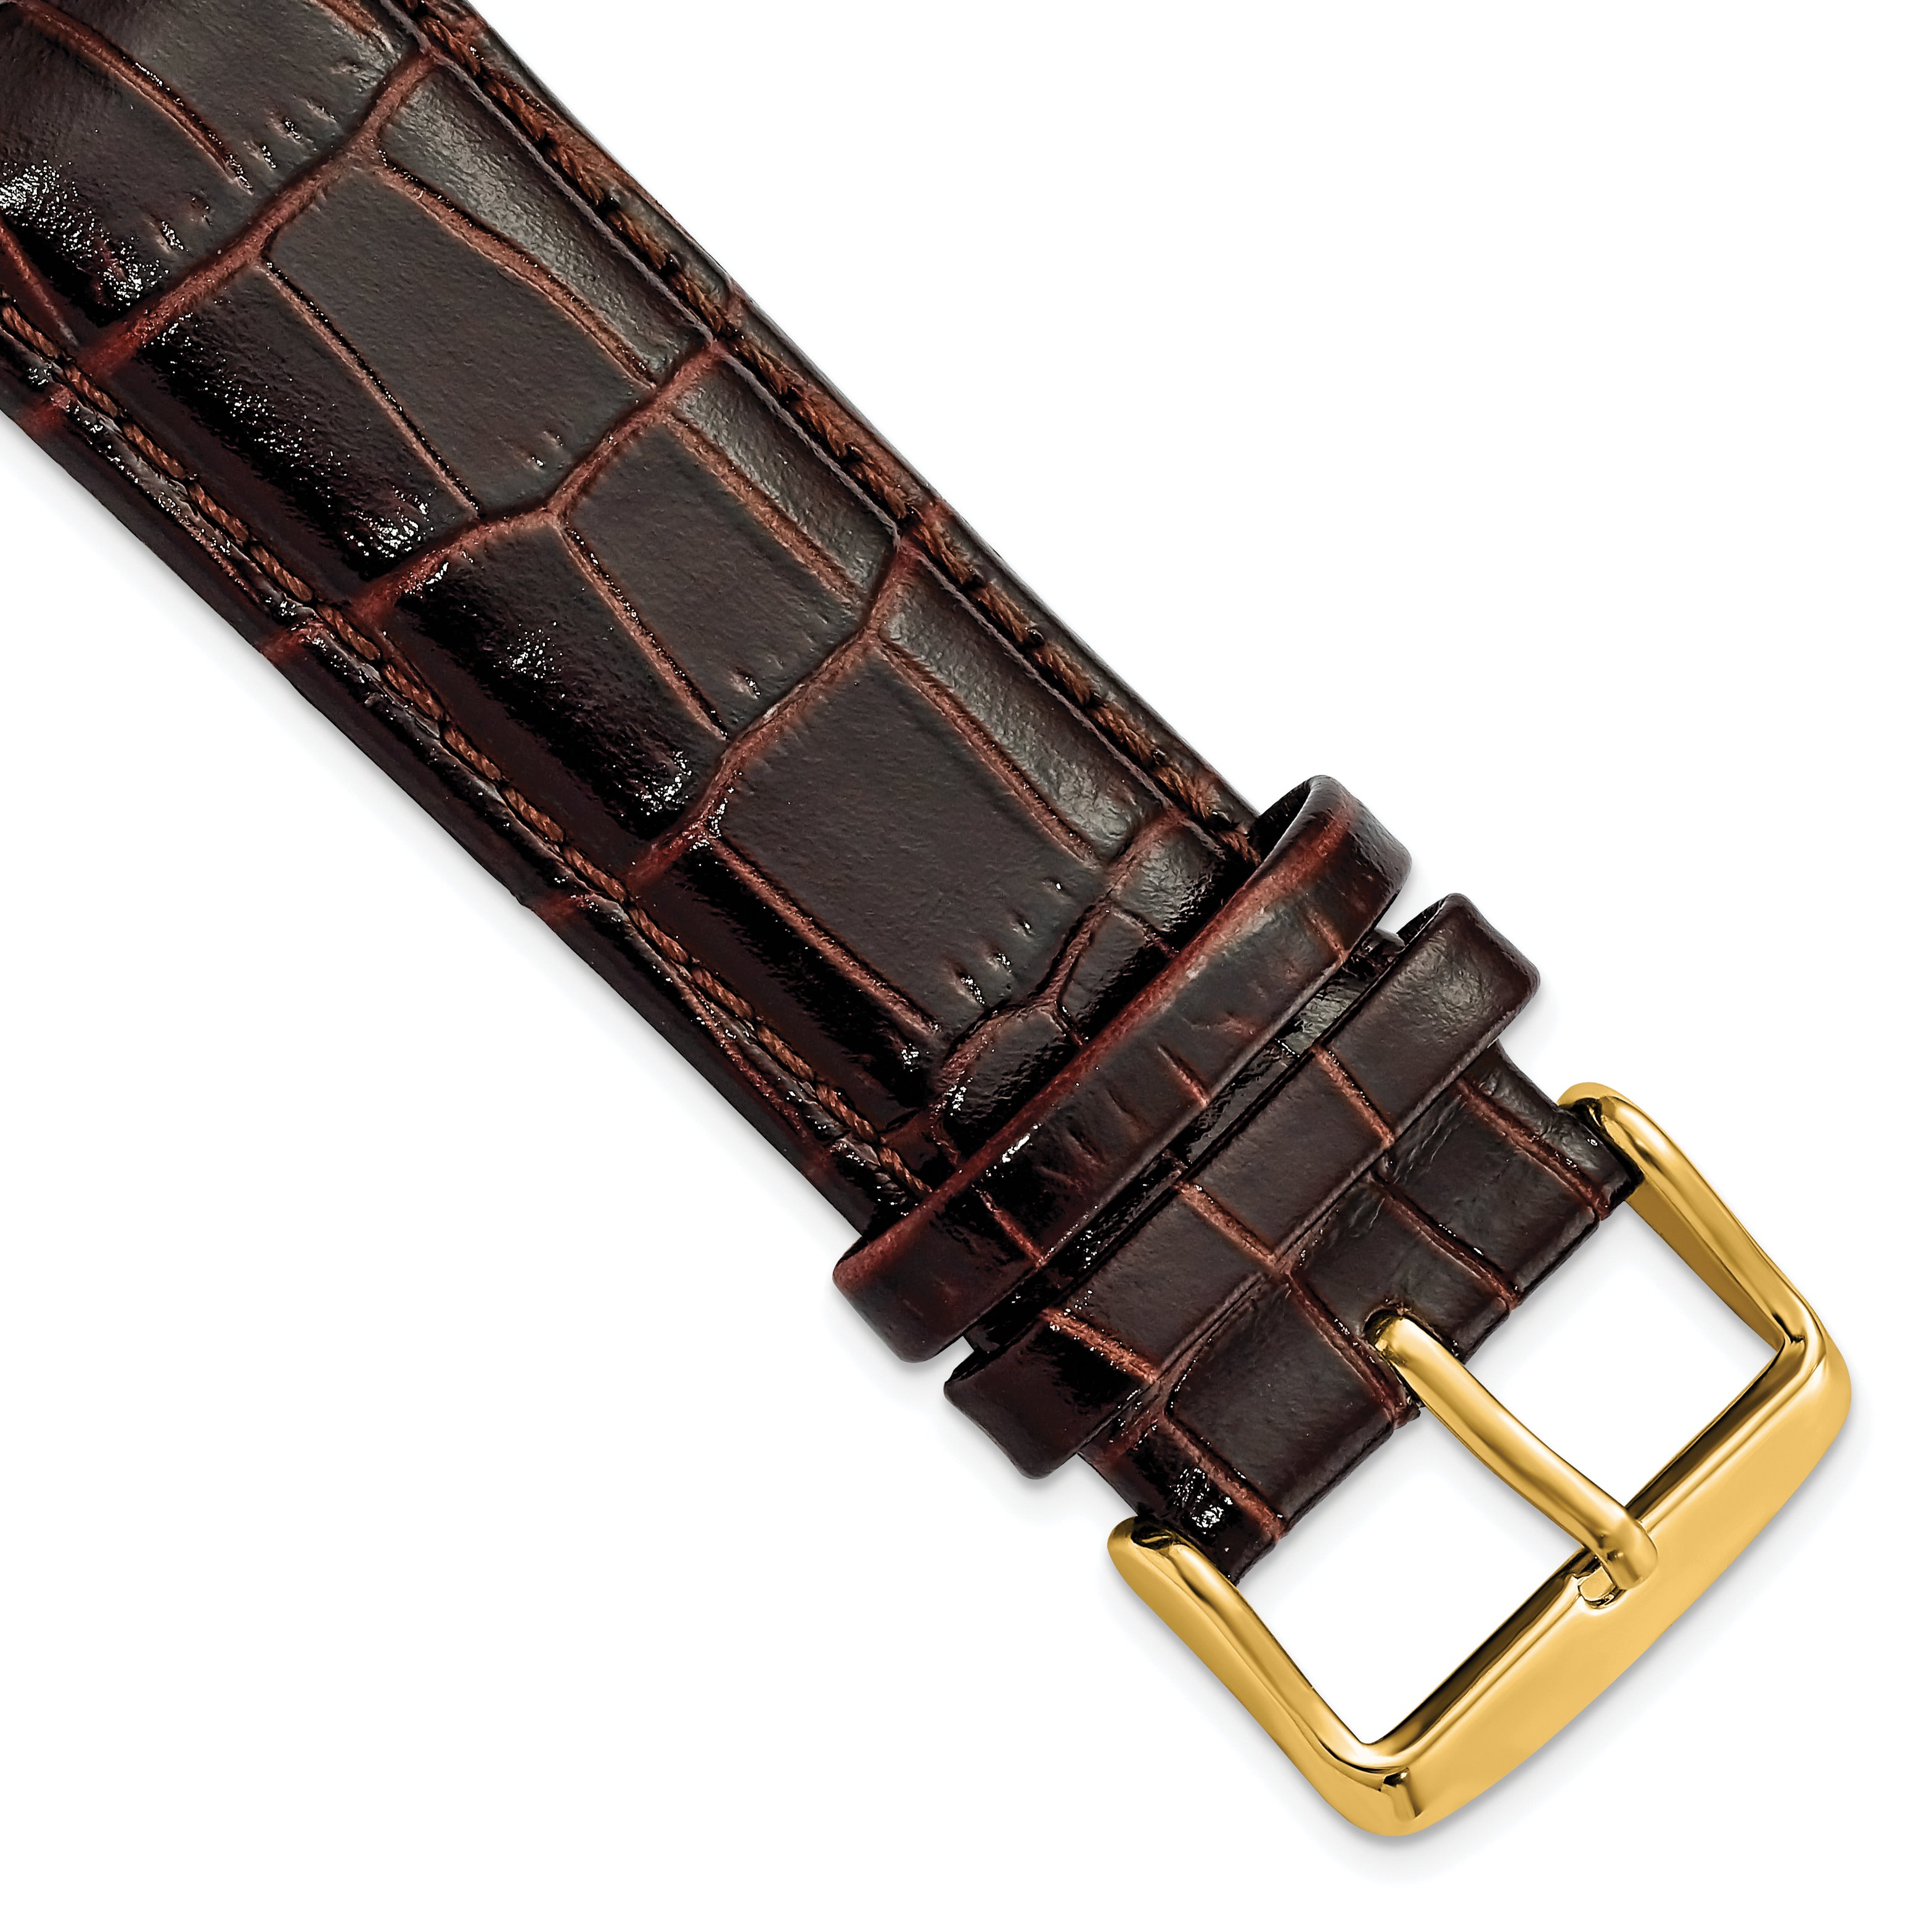 DeBeer 24mm Dark Brown Crocodile Grain Chronograph Leather with Gold-tone Buckle 7.5 inch Watch Band